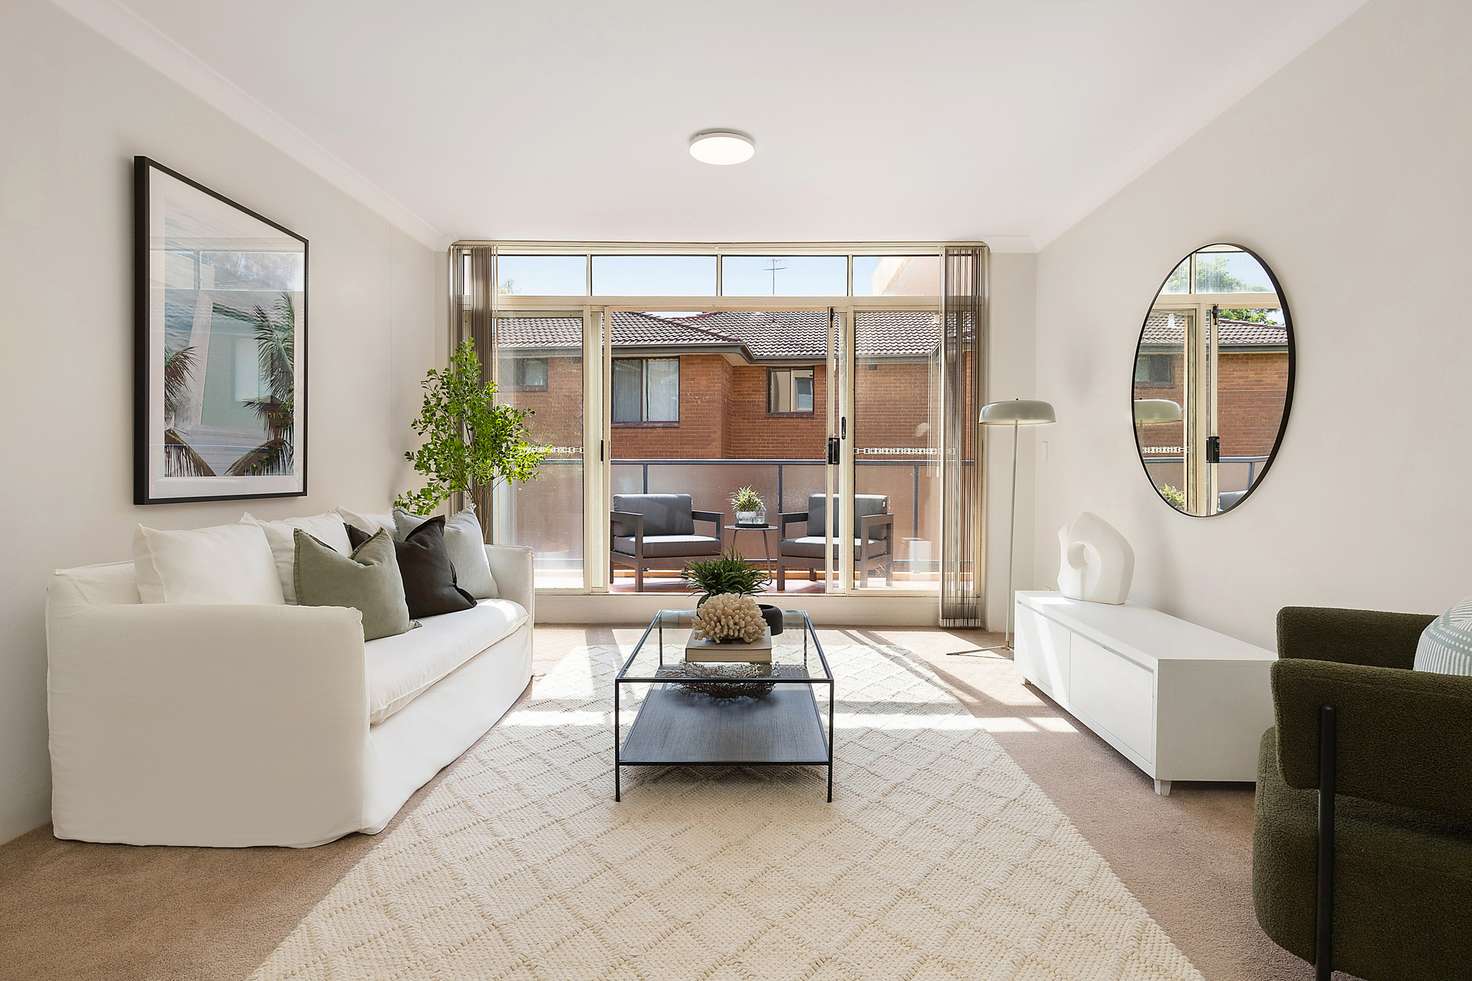 Main view of Homely apartment listing, 8/7-11 Collaroy Street, Collaroy NSW 2097